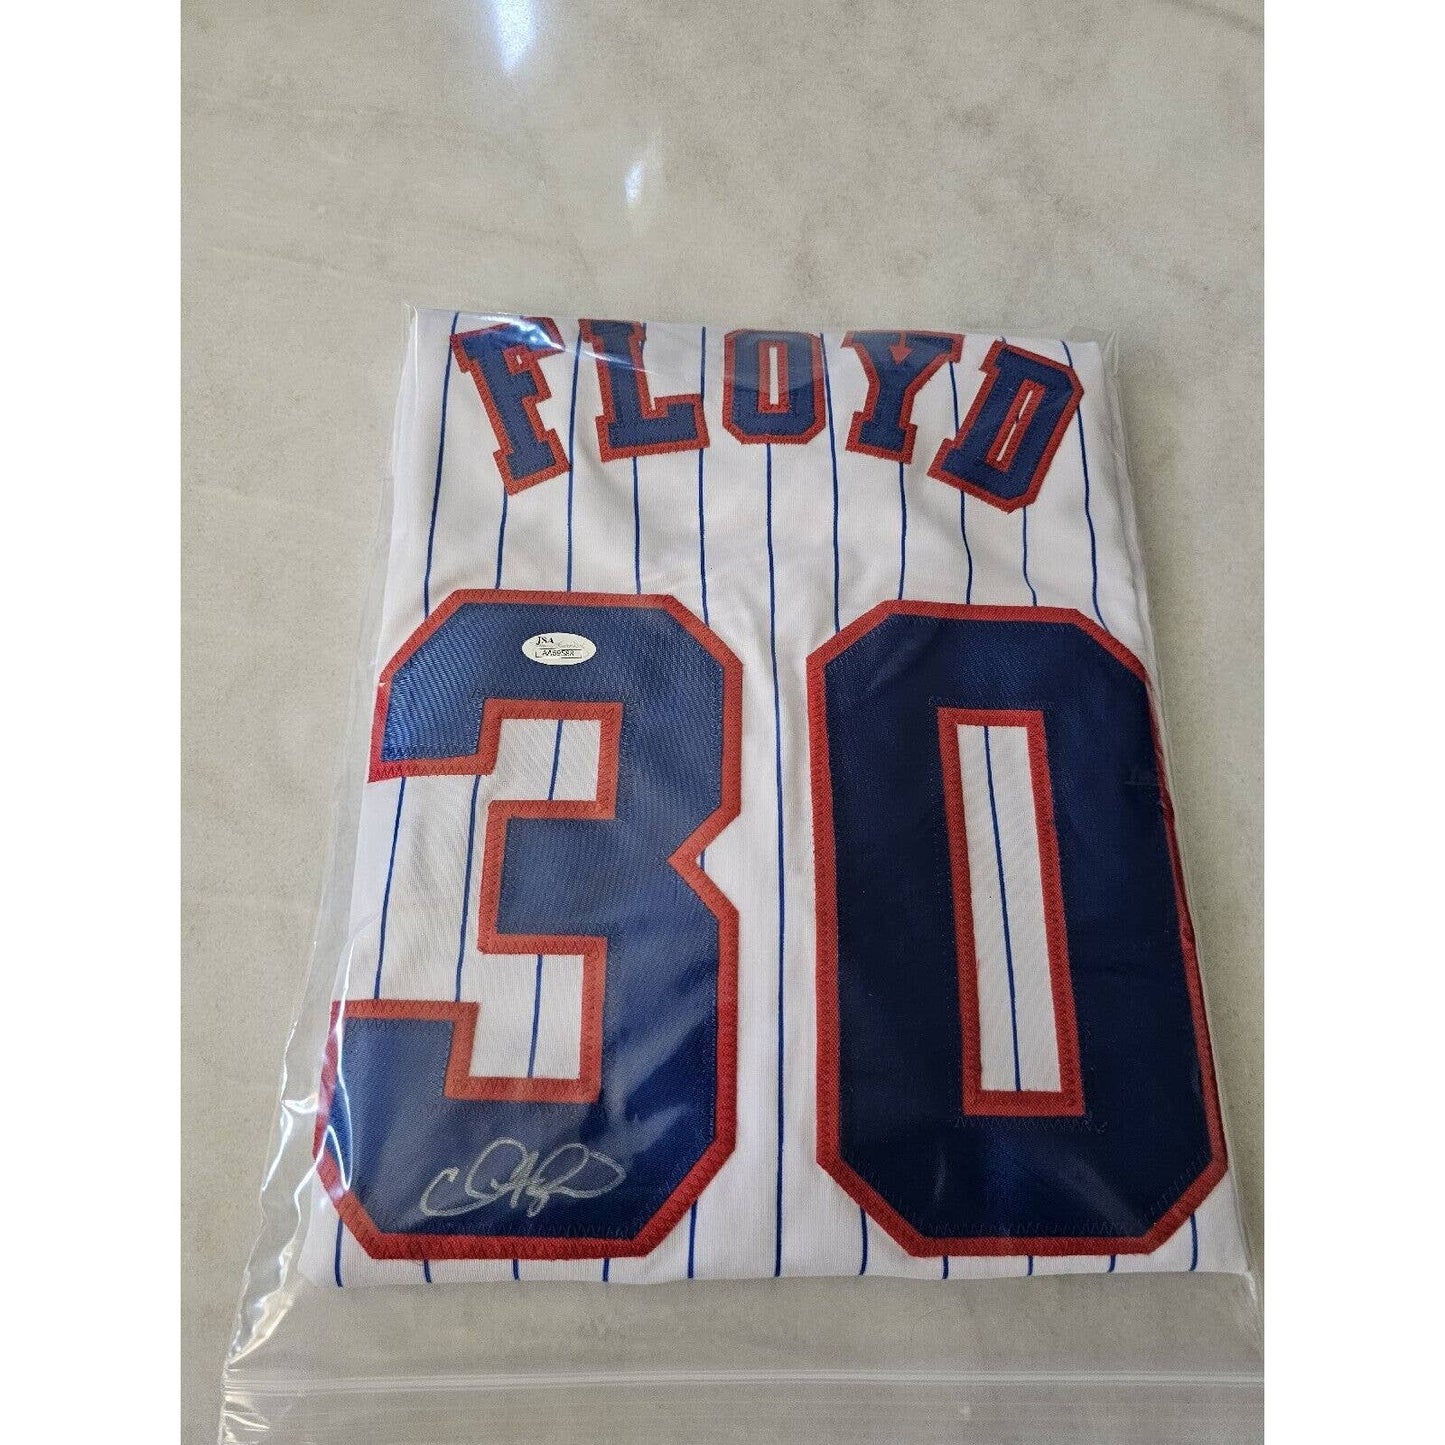 Cliff Floyd Autographed/Signed Jersey JSA COA Montreal Expos